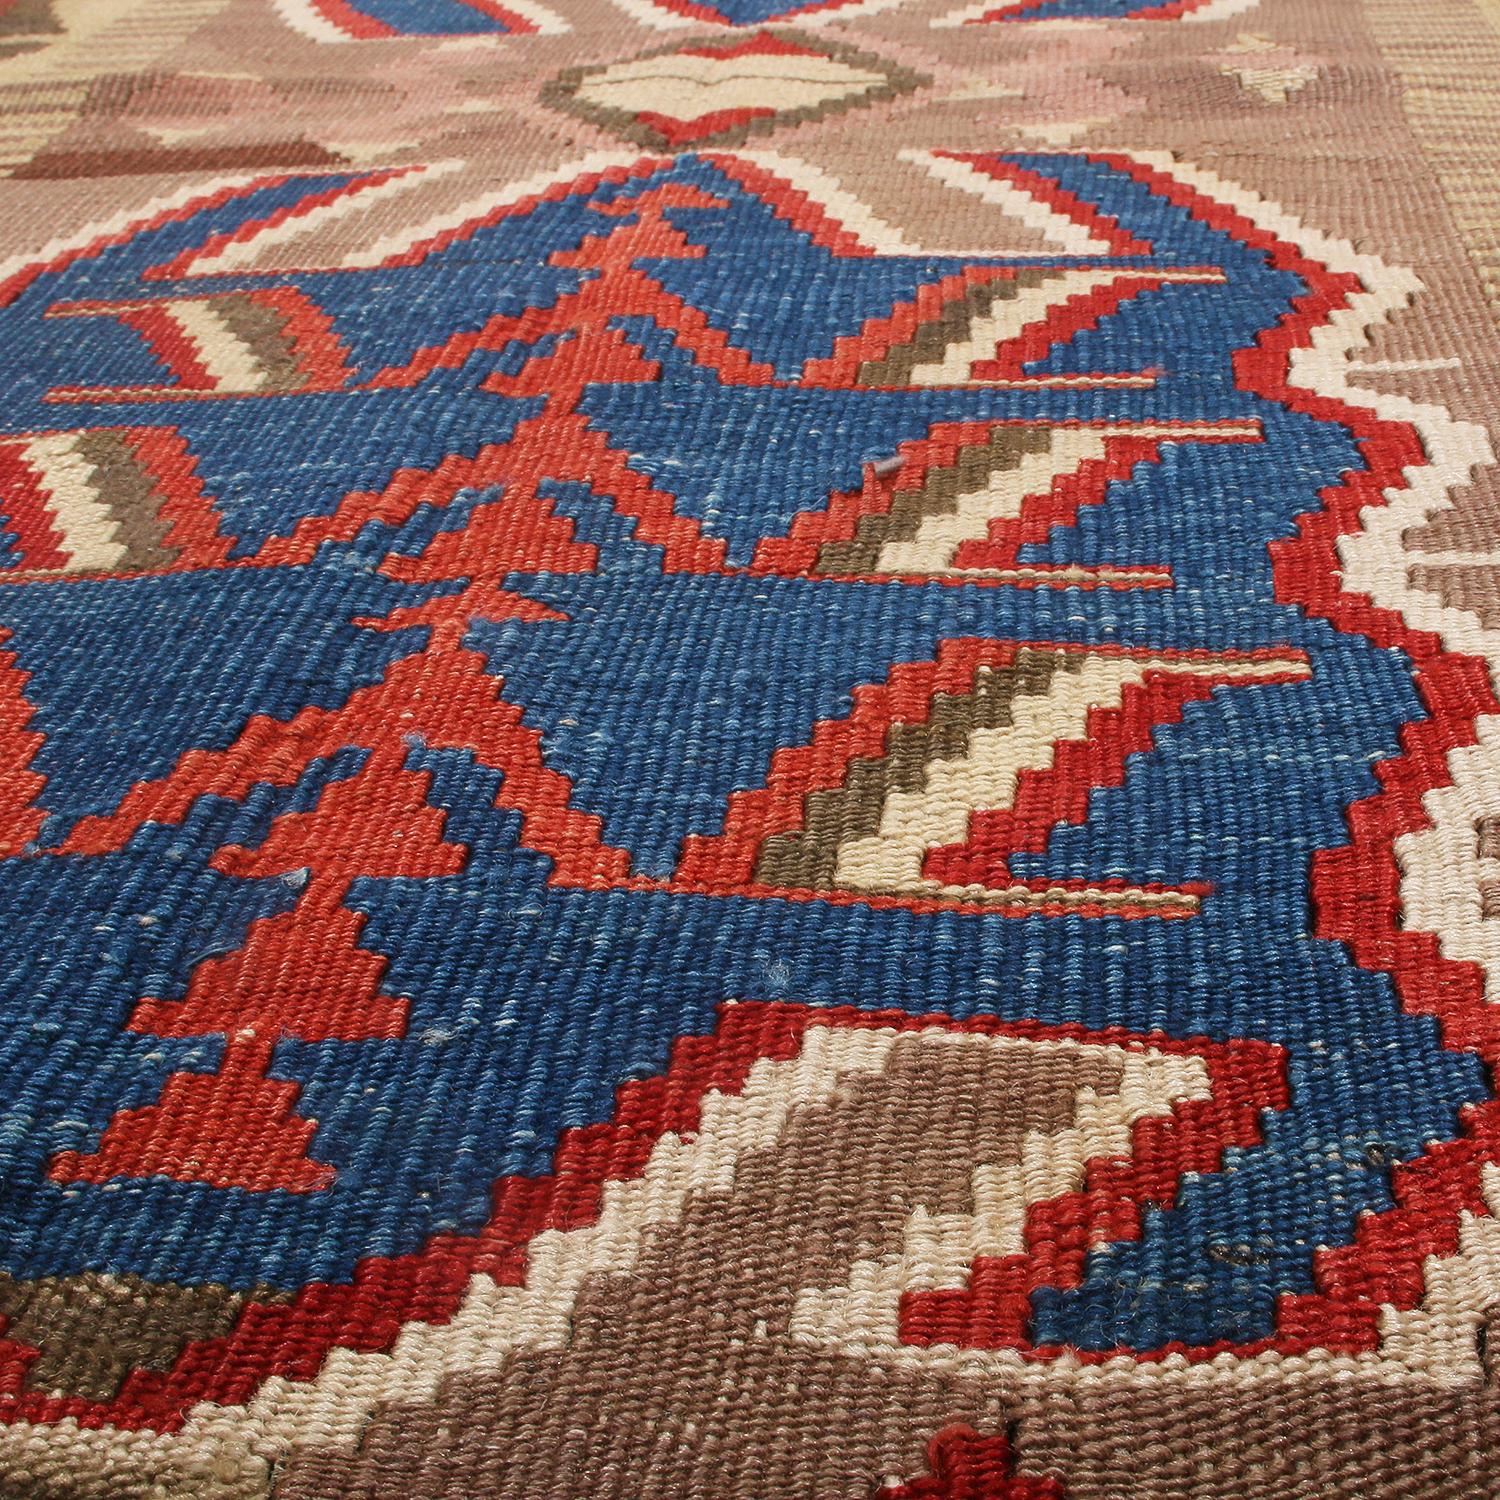 Hand-Woven Vintage Midcentury Beige and Red Wool Kilim Rug, Blue Medallion by Rug & Kilim For Sale